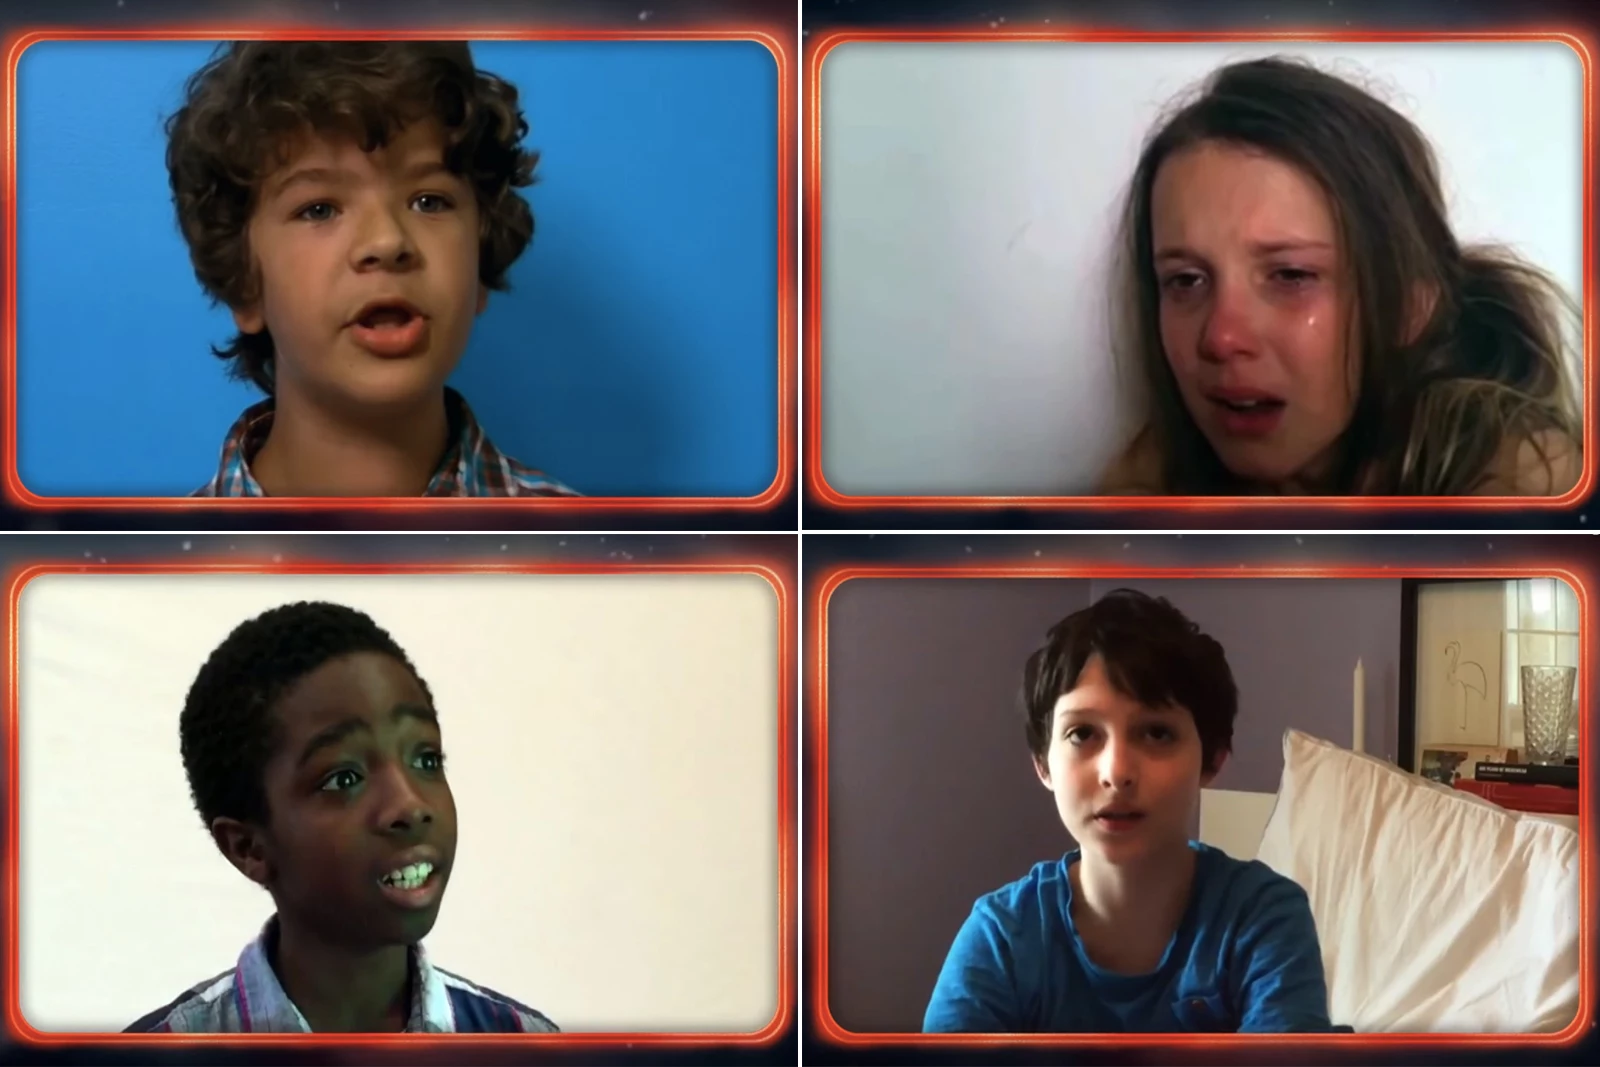 Watch The Stranger Things Kids Watch Their Audition Tapes